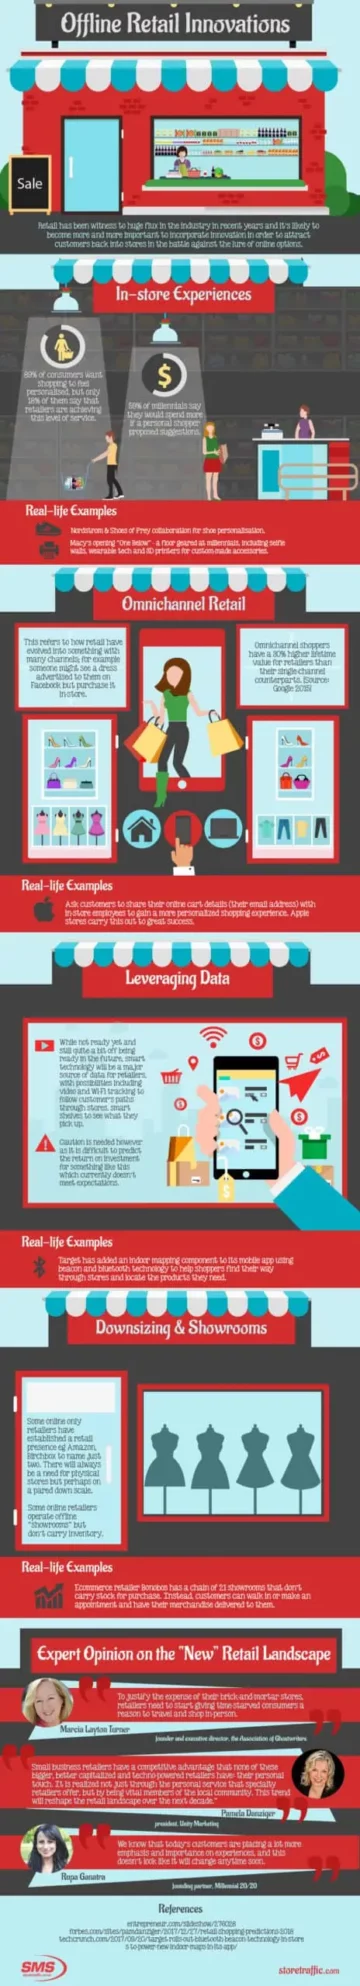 Innovations in Offline Retail! (Infographic) - Supply Chain Game Changer™